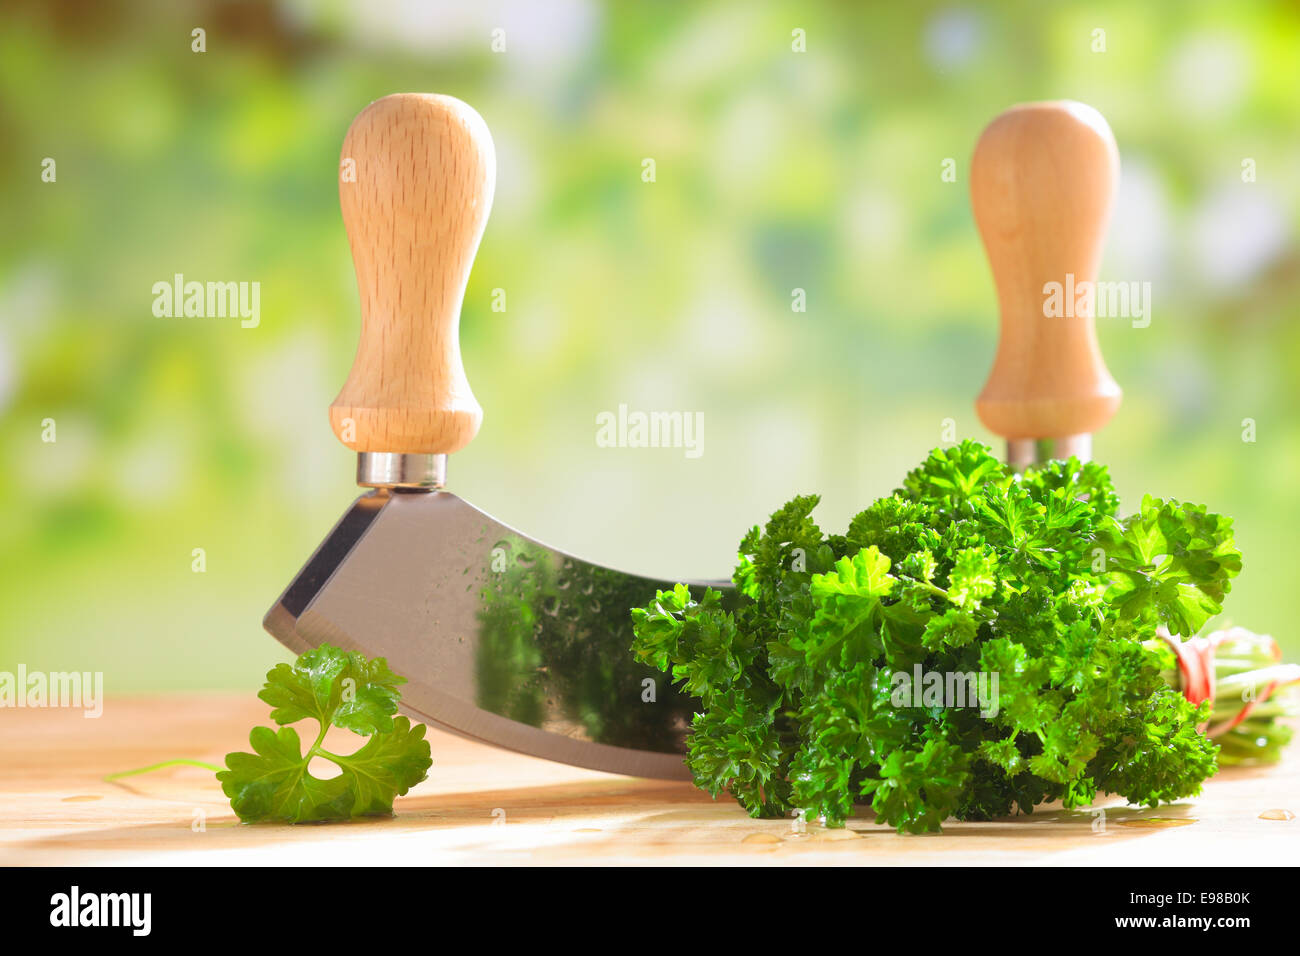 Bunch of fresh green crinkly leaf parsley lying outdoors on a wooden table in the sunshine with a chopping blade Stock Photo